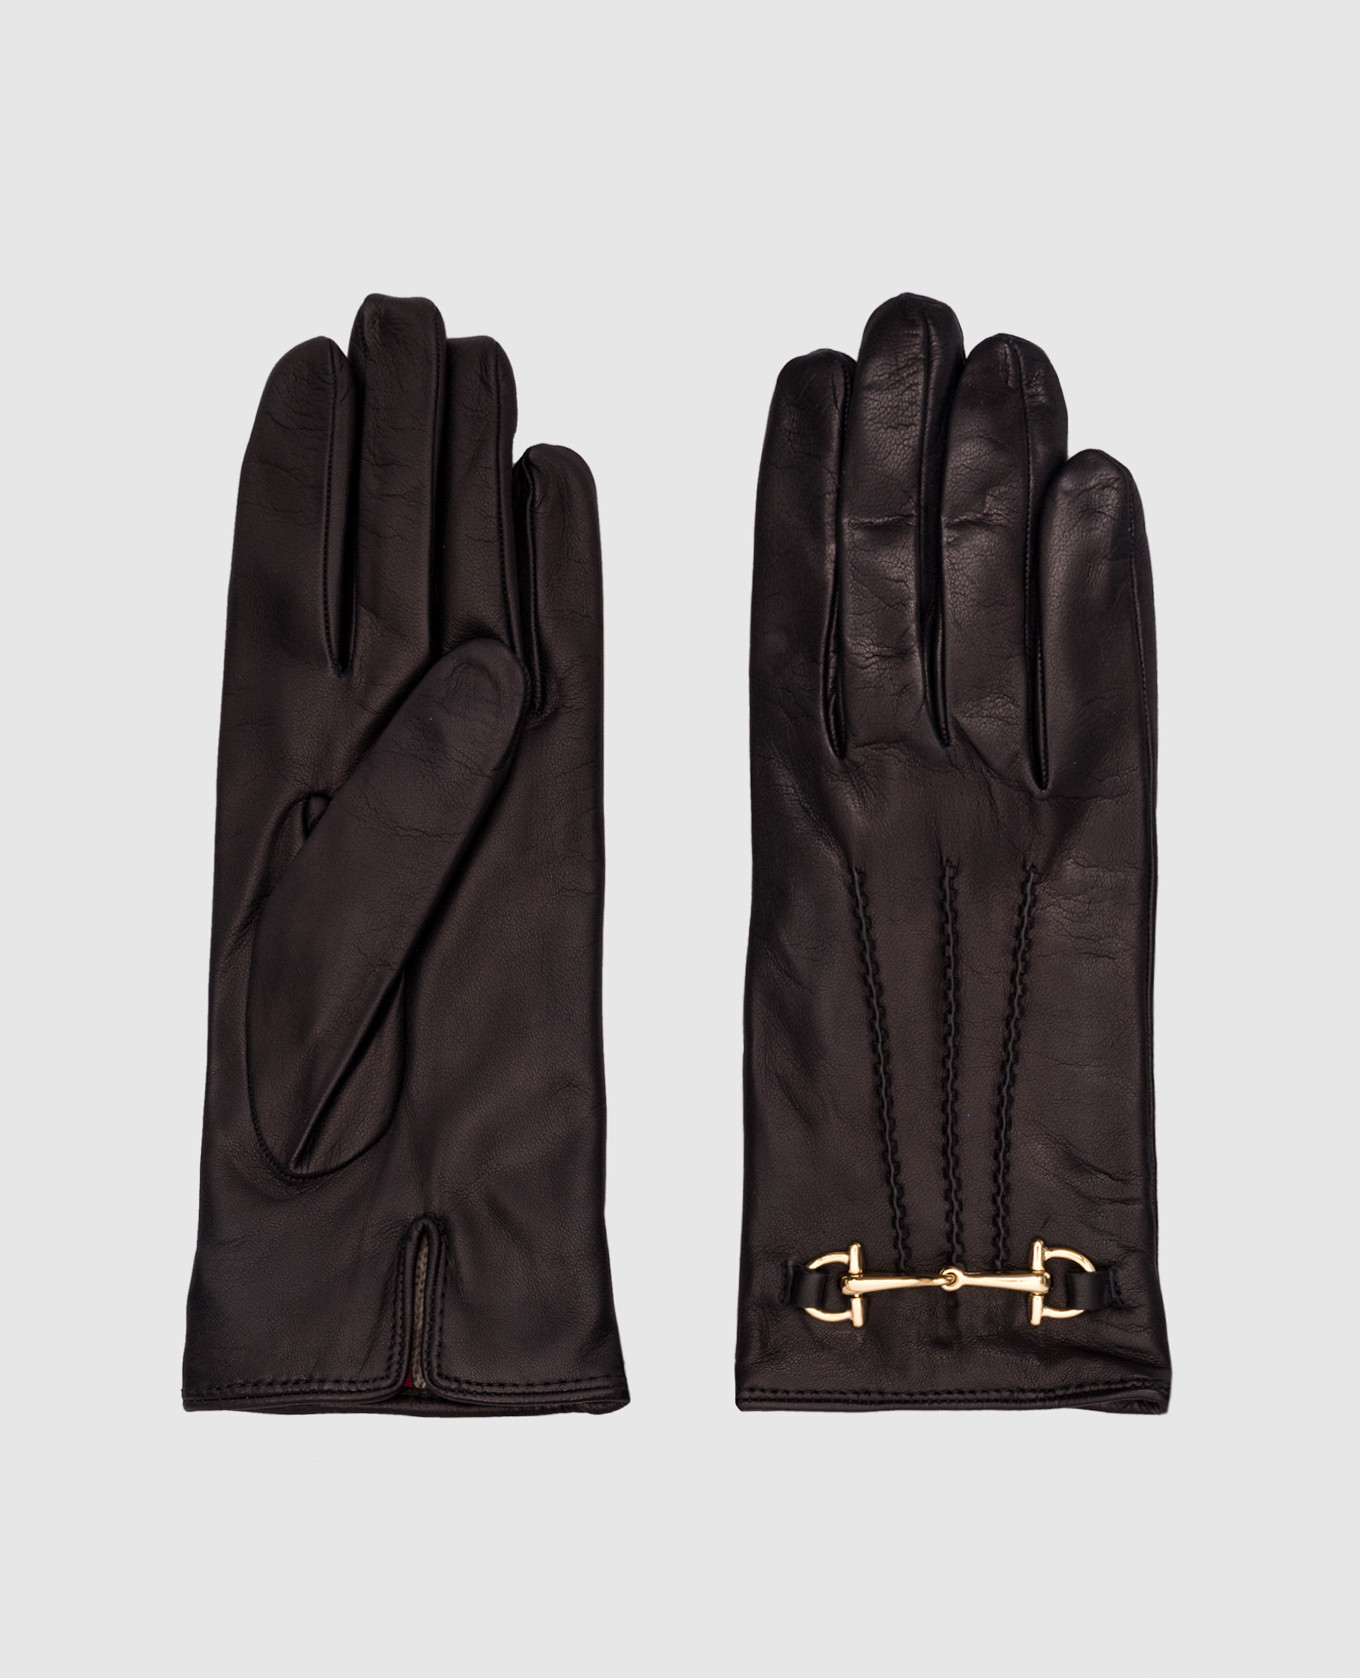 Black leather gloves with a chain